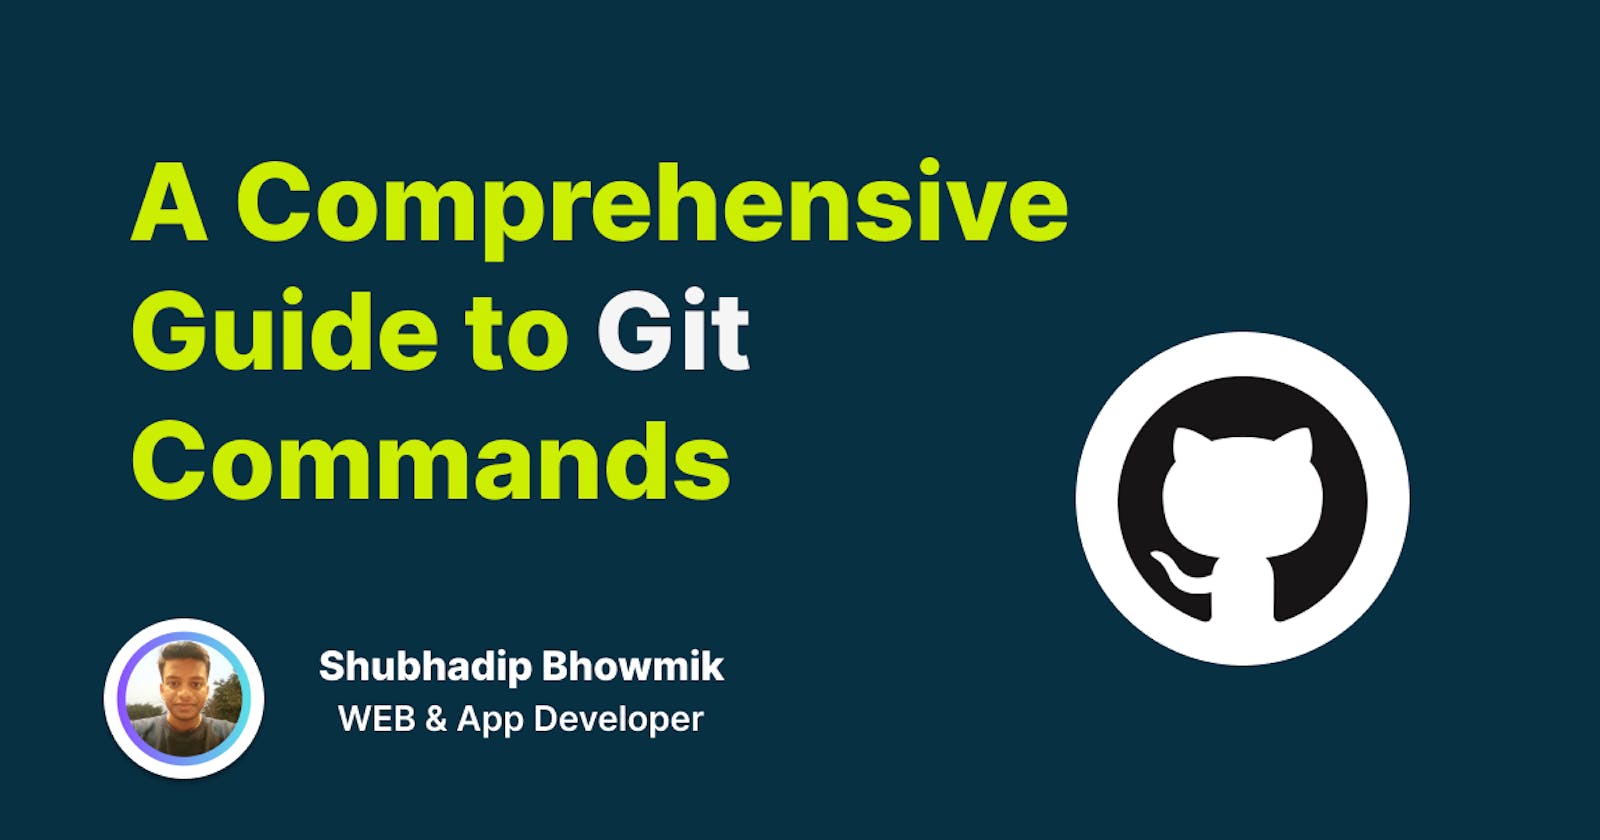 Git Essentials for Beginners: A Comprehensive Guide to Git Commands